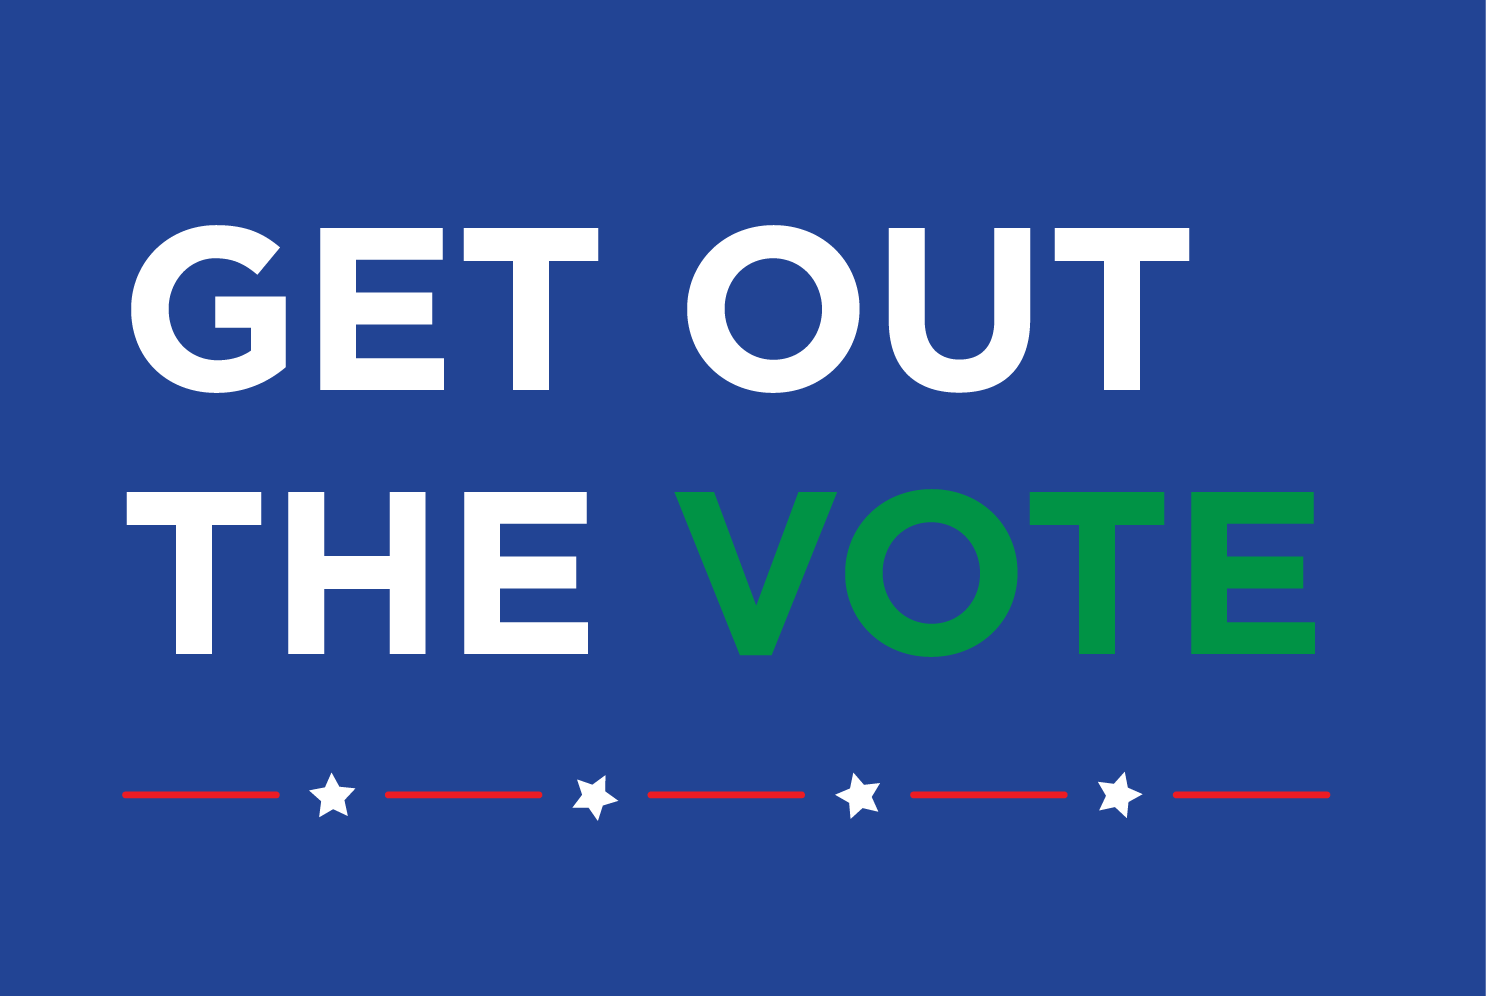 VOTER REGISTRATION, VOTING, and GETTING OUT THE VOTE - ecoAmerica